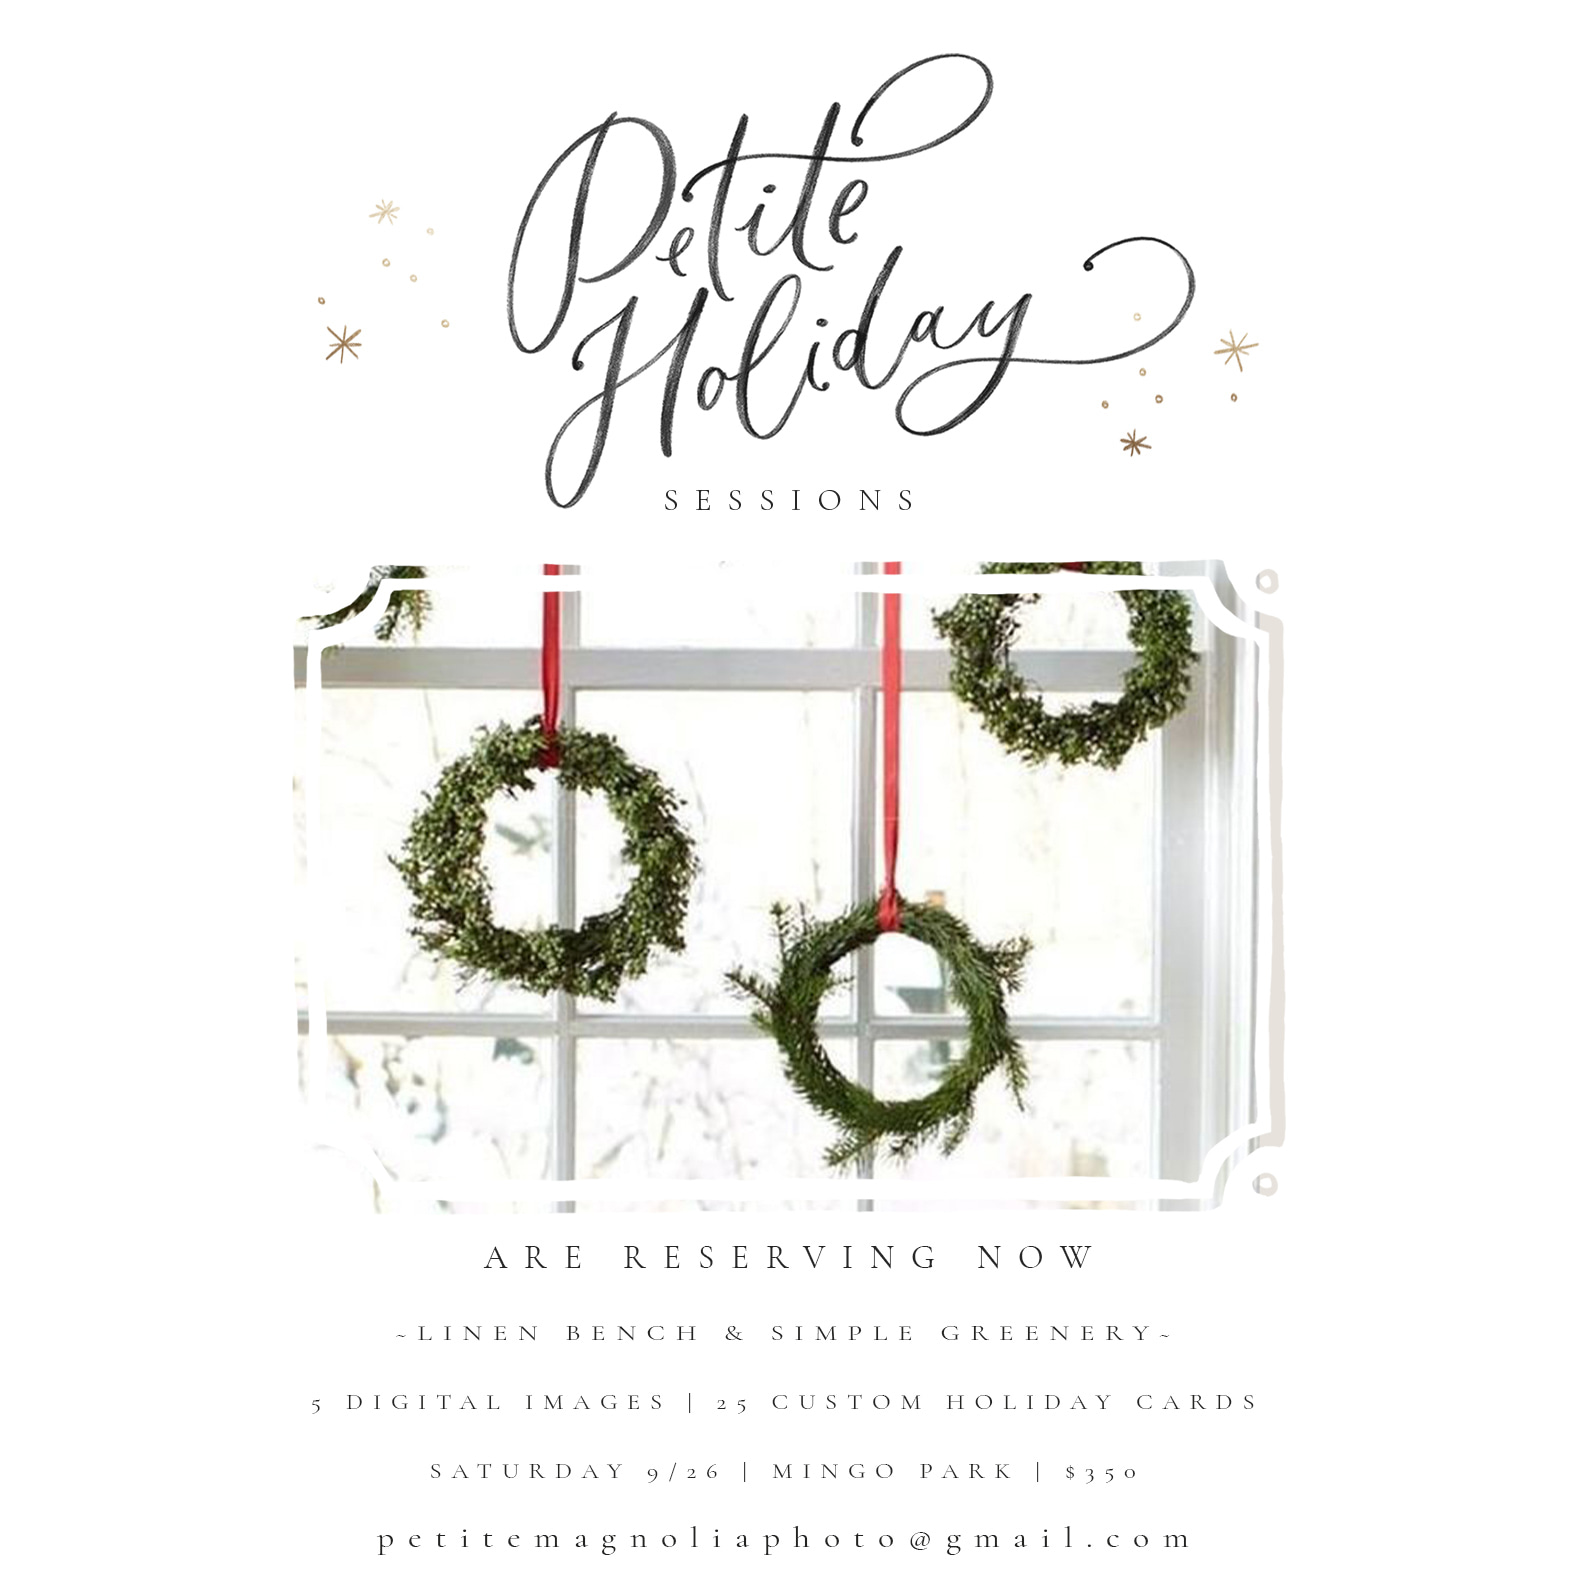 Petite Holiday Sessions